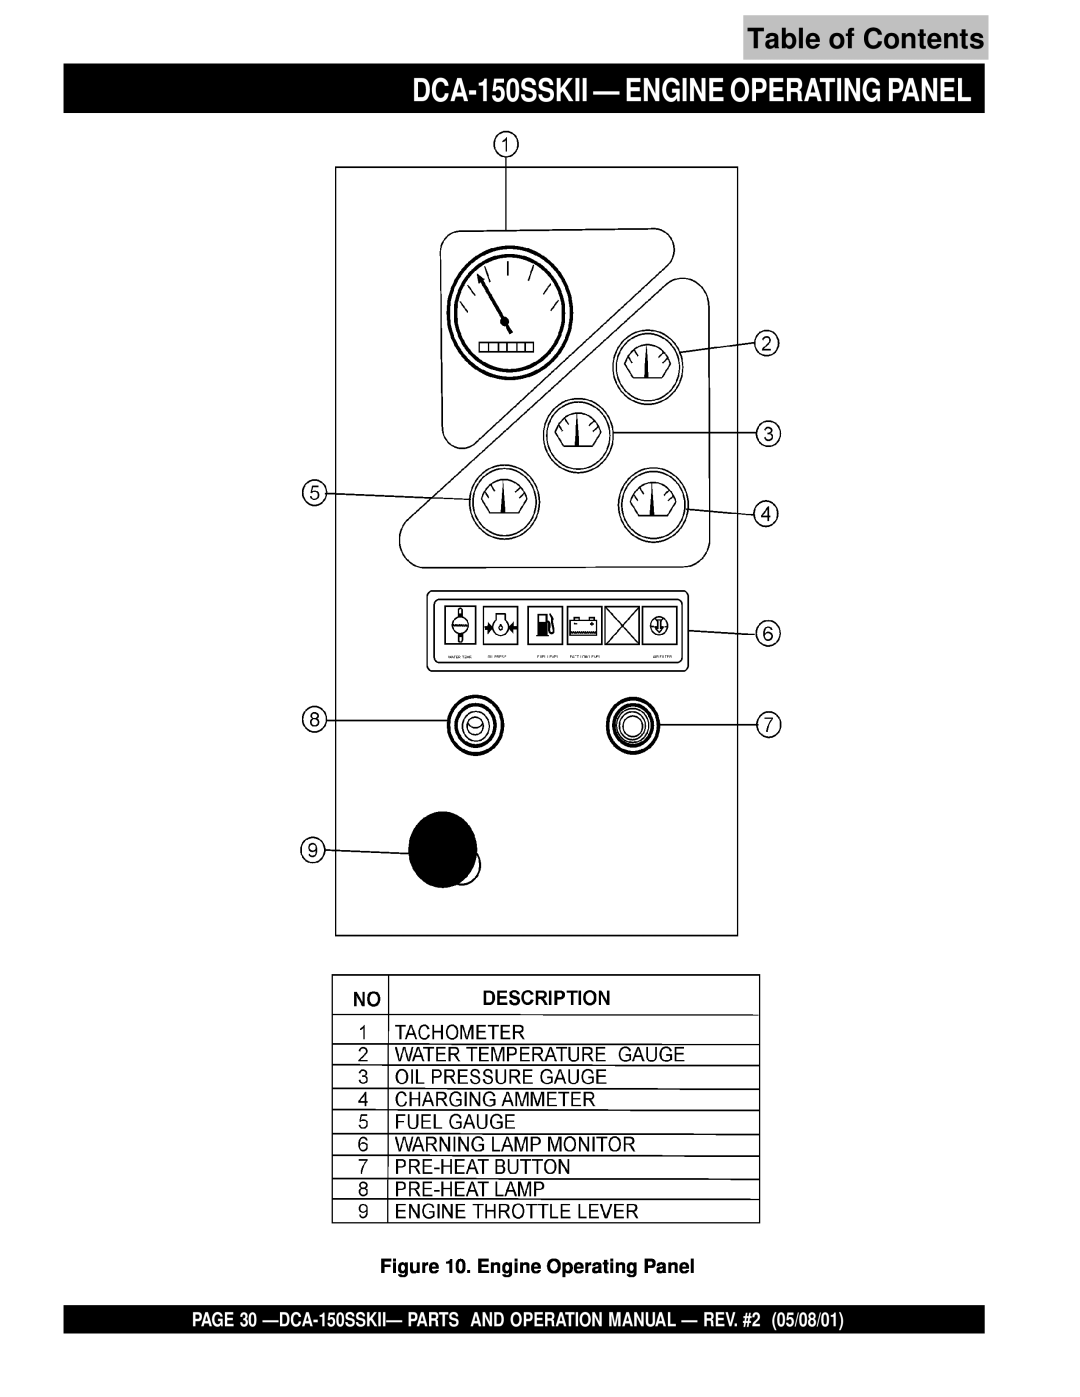 Multiquip operation manual DCA-150SSKII - ENGINE OPERATING PANEL, Table of Contents, Engine Operating Panel 